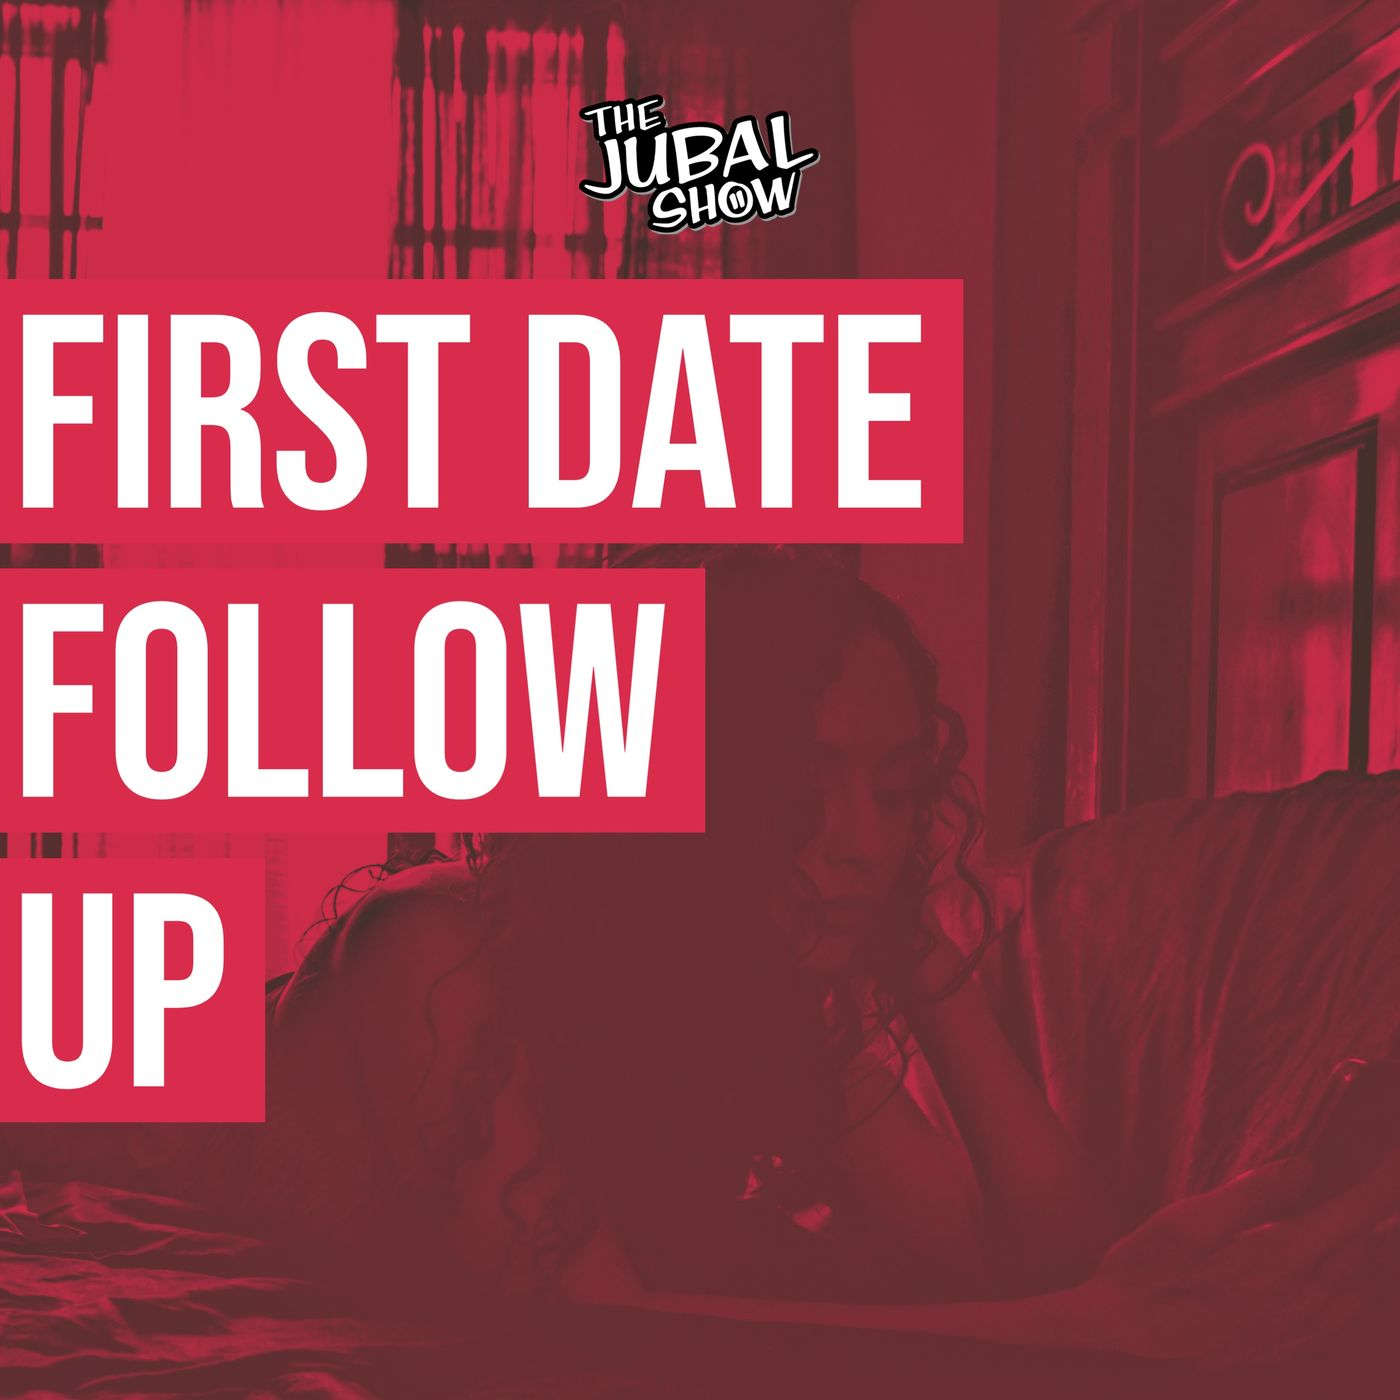 You'll never guess who said what in this First Date Follow Up!